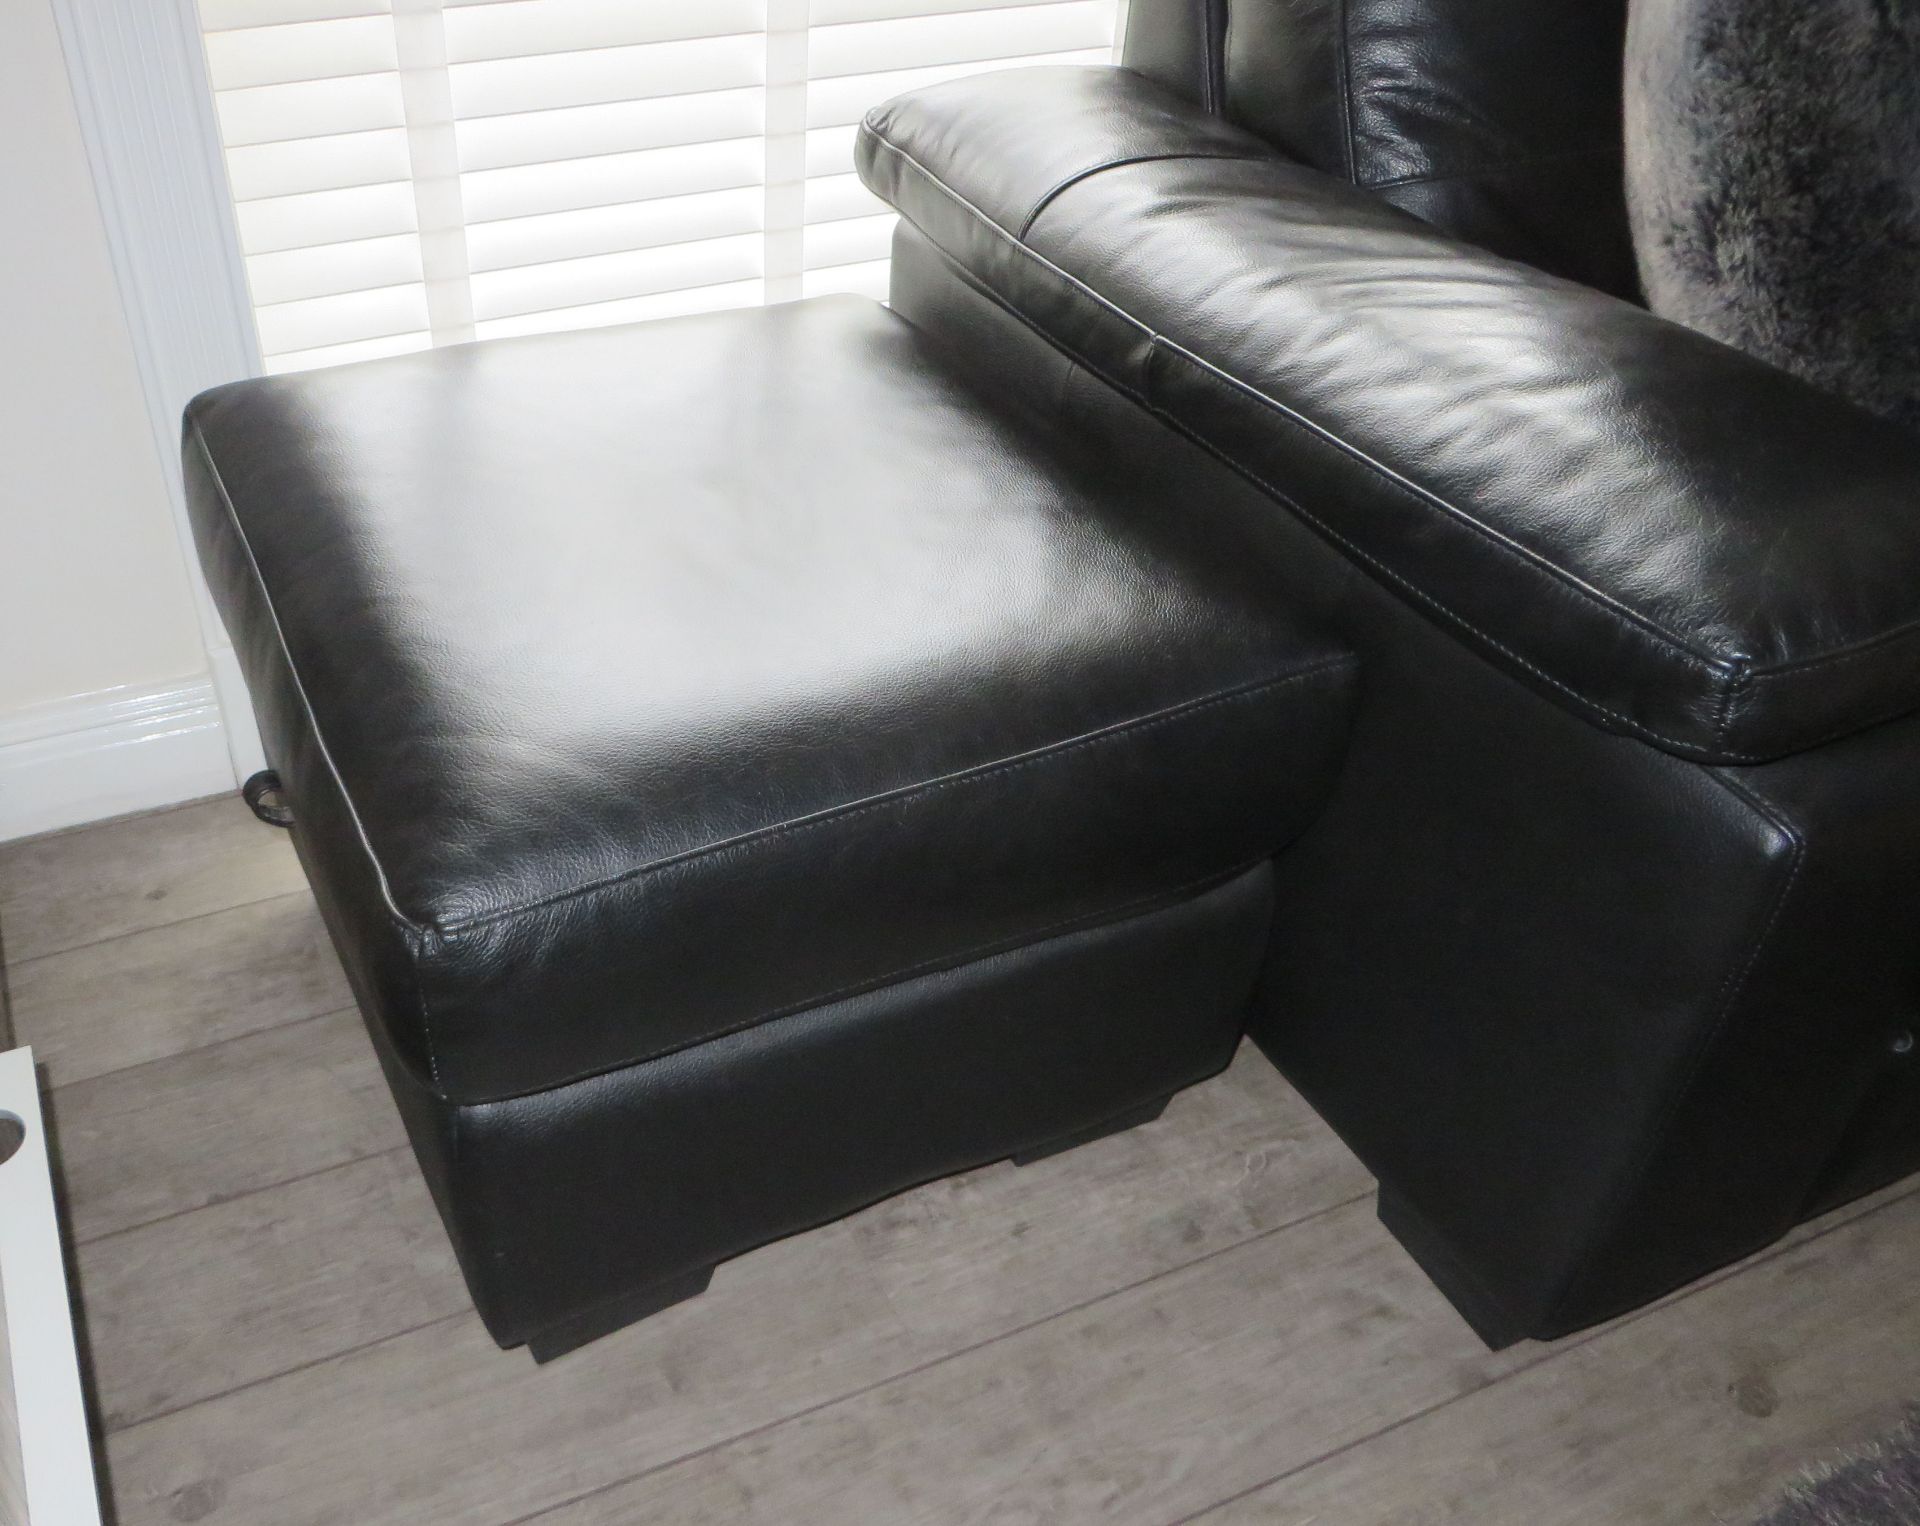 1 x Large Black Leather DFS Corner Sofa with 1 x Pouffe- Excellent Condition - Over £4000 new - Image 12 of 17